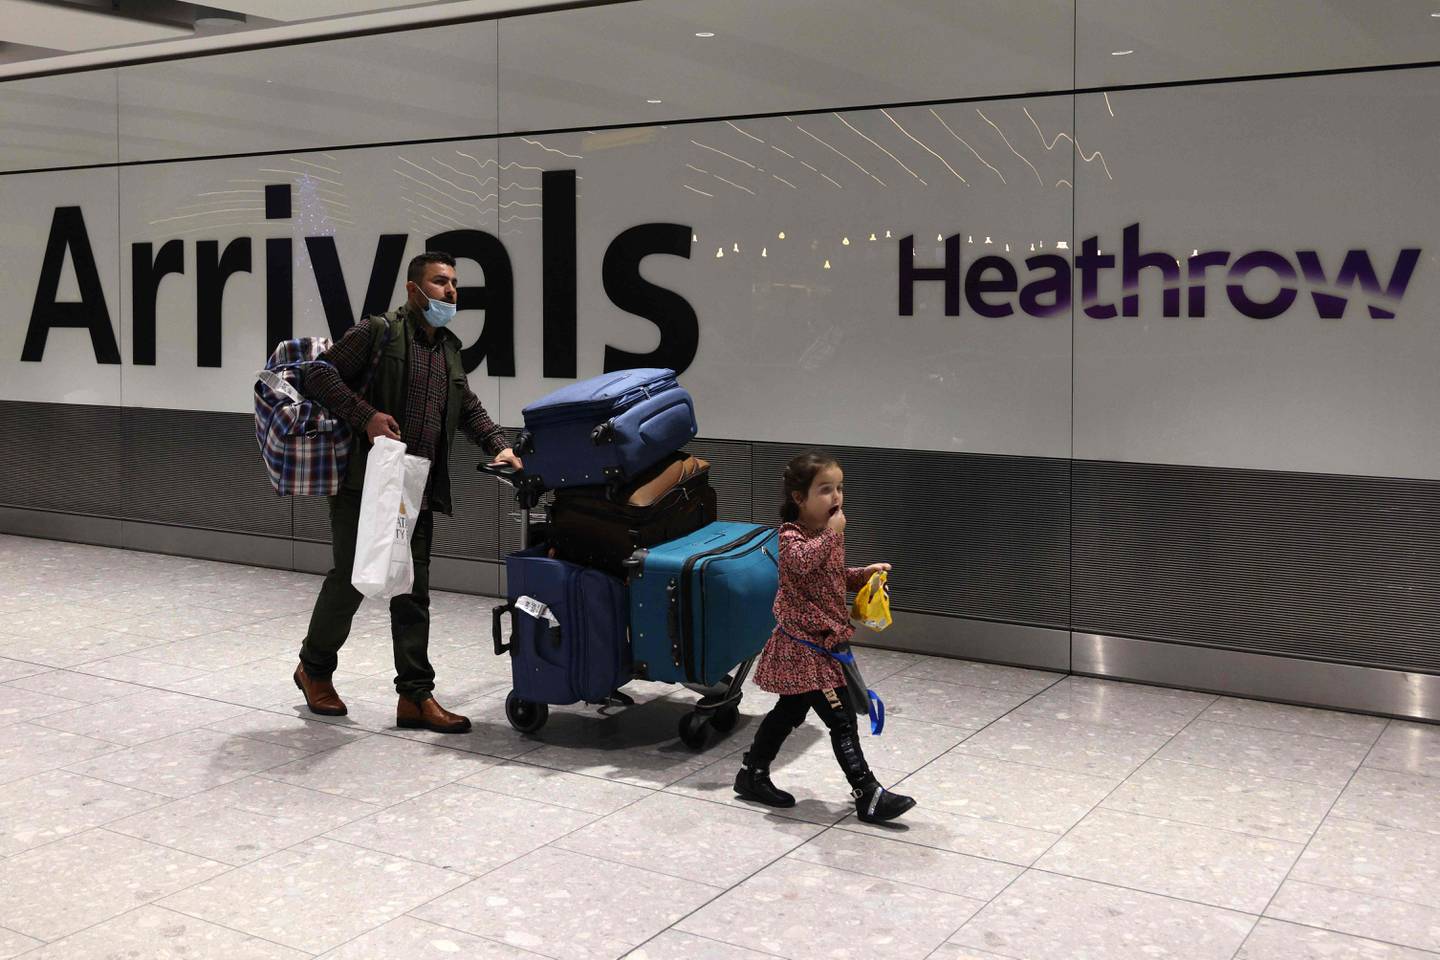 People arrive at London Heathrow Airport on the day the new restrictions took effect. AFP